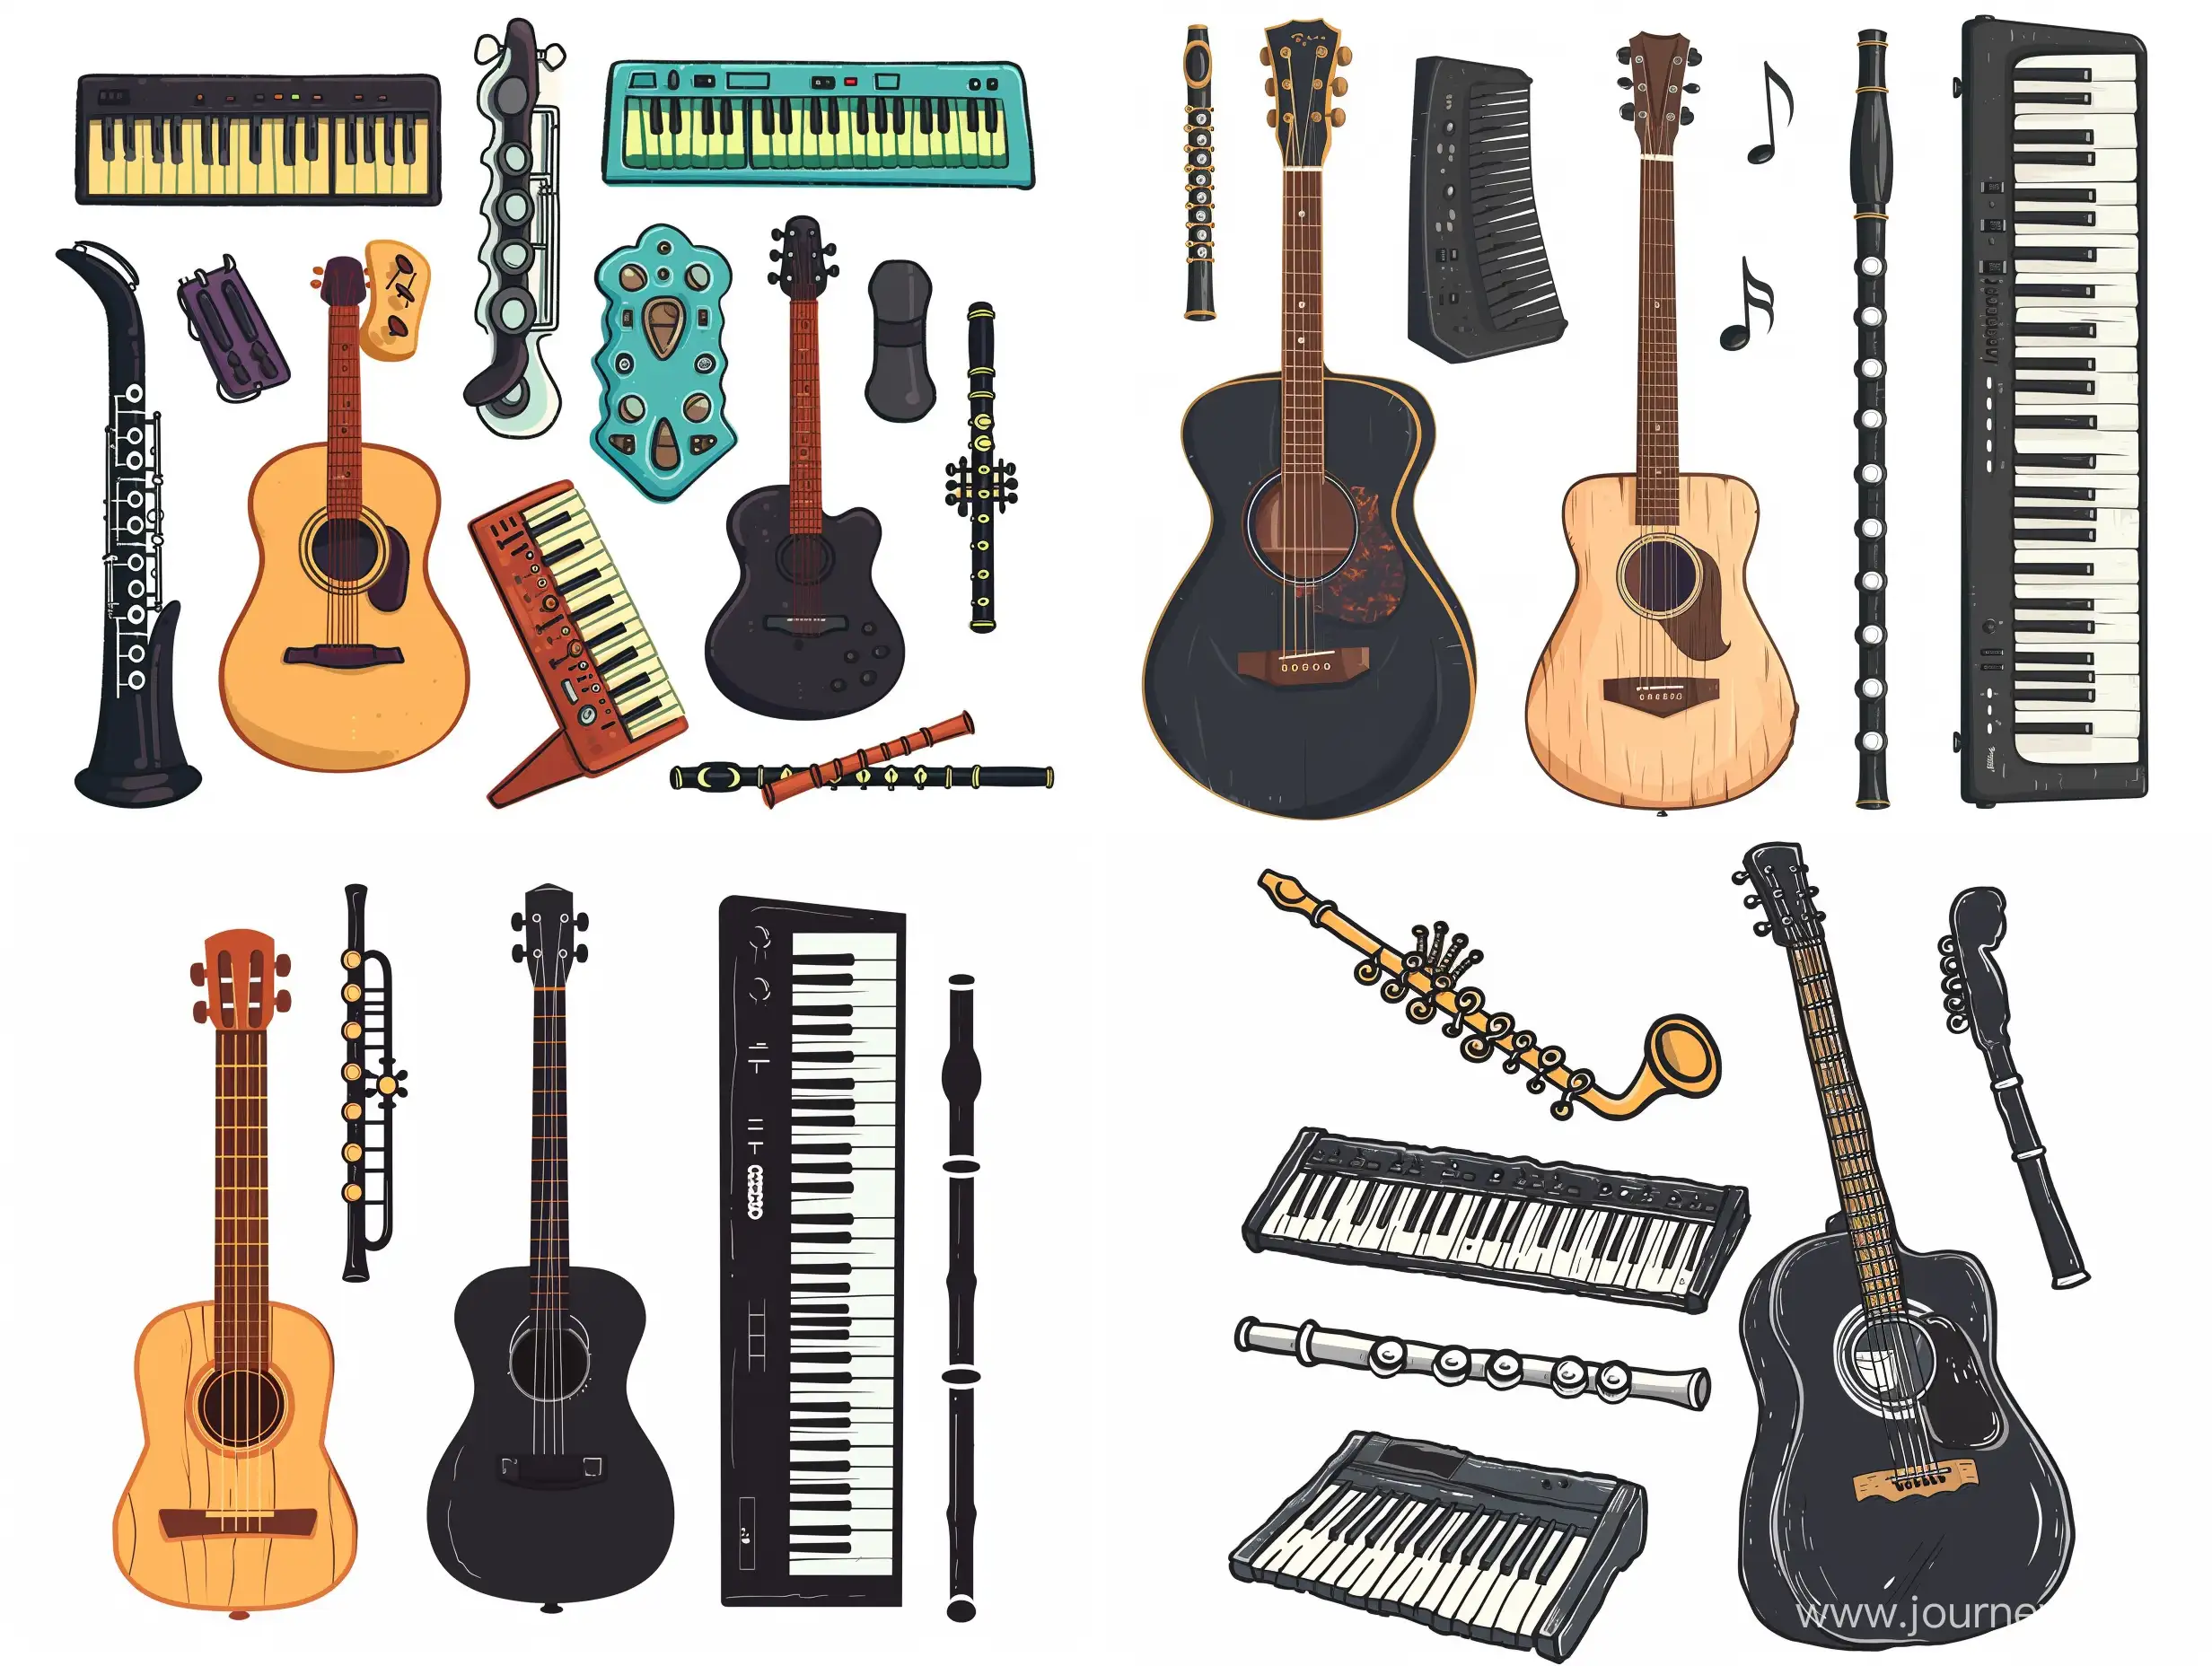 acoustic guitar, flute, keyboards, cartoon style, caricature, flat illustration, black color, on white background, vector, pop art style